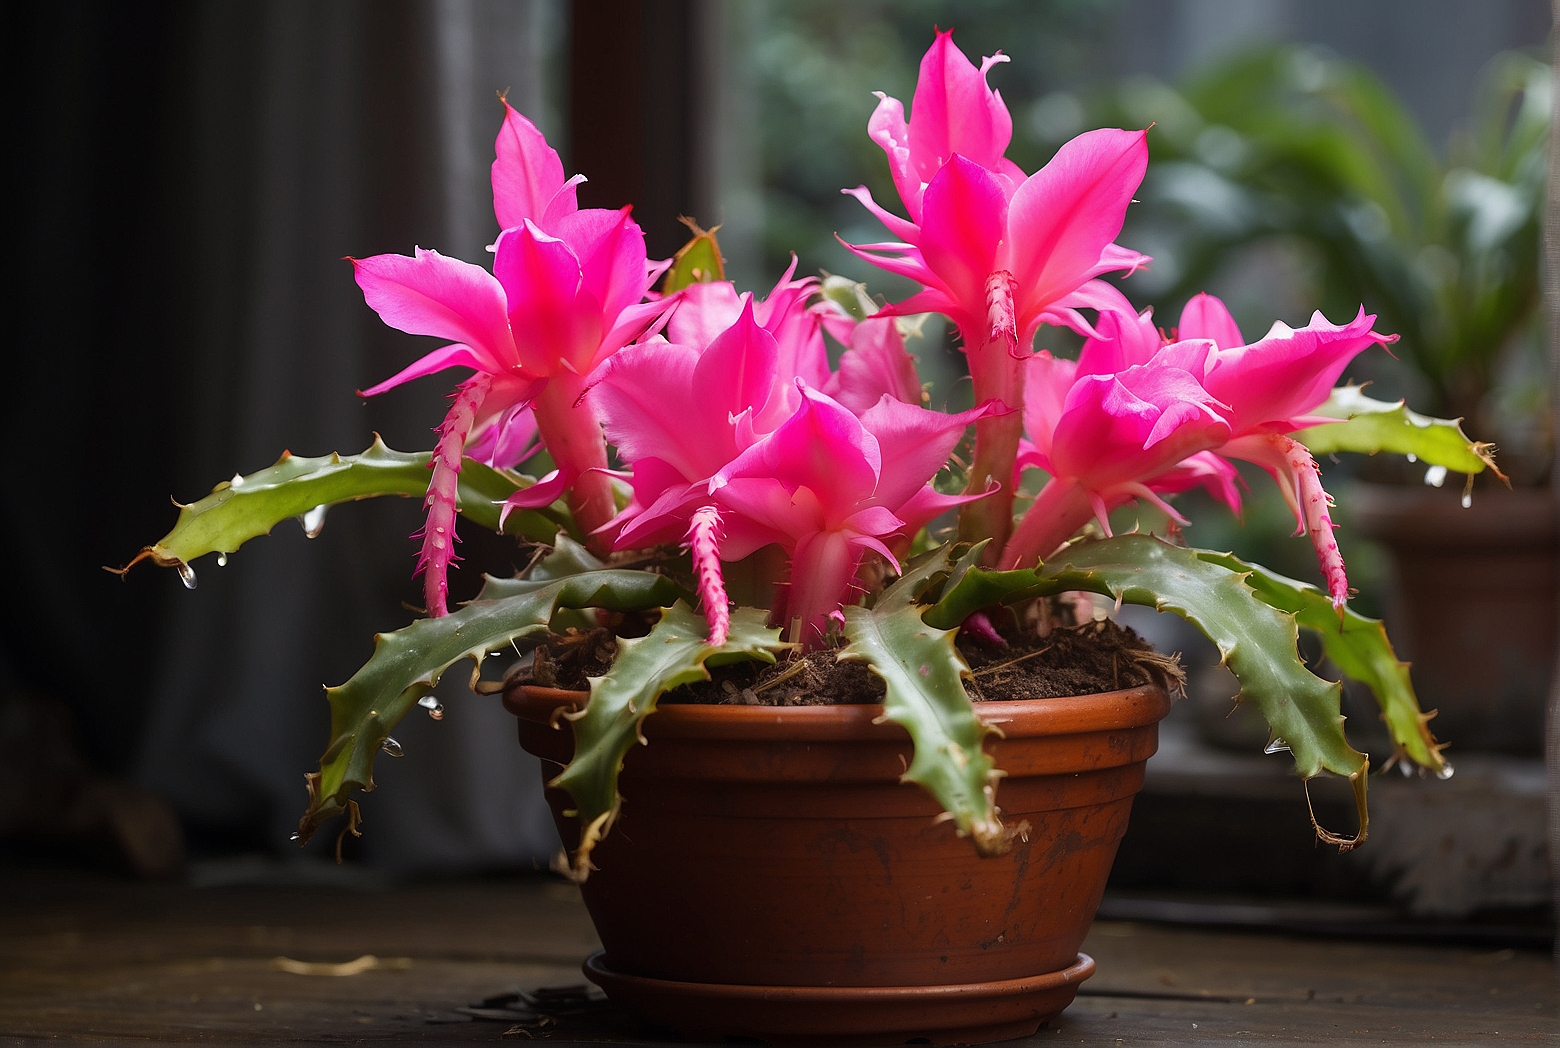 Why is my Christmas cactus wilting?